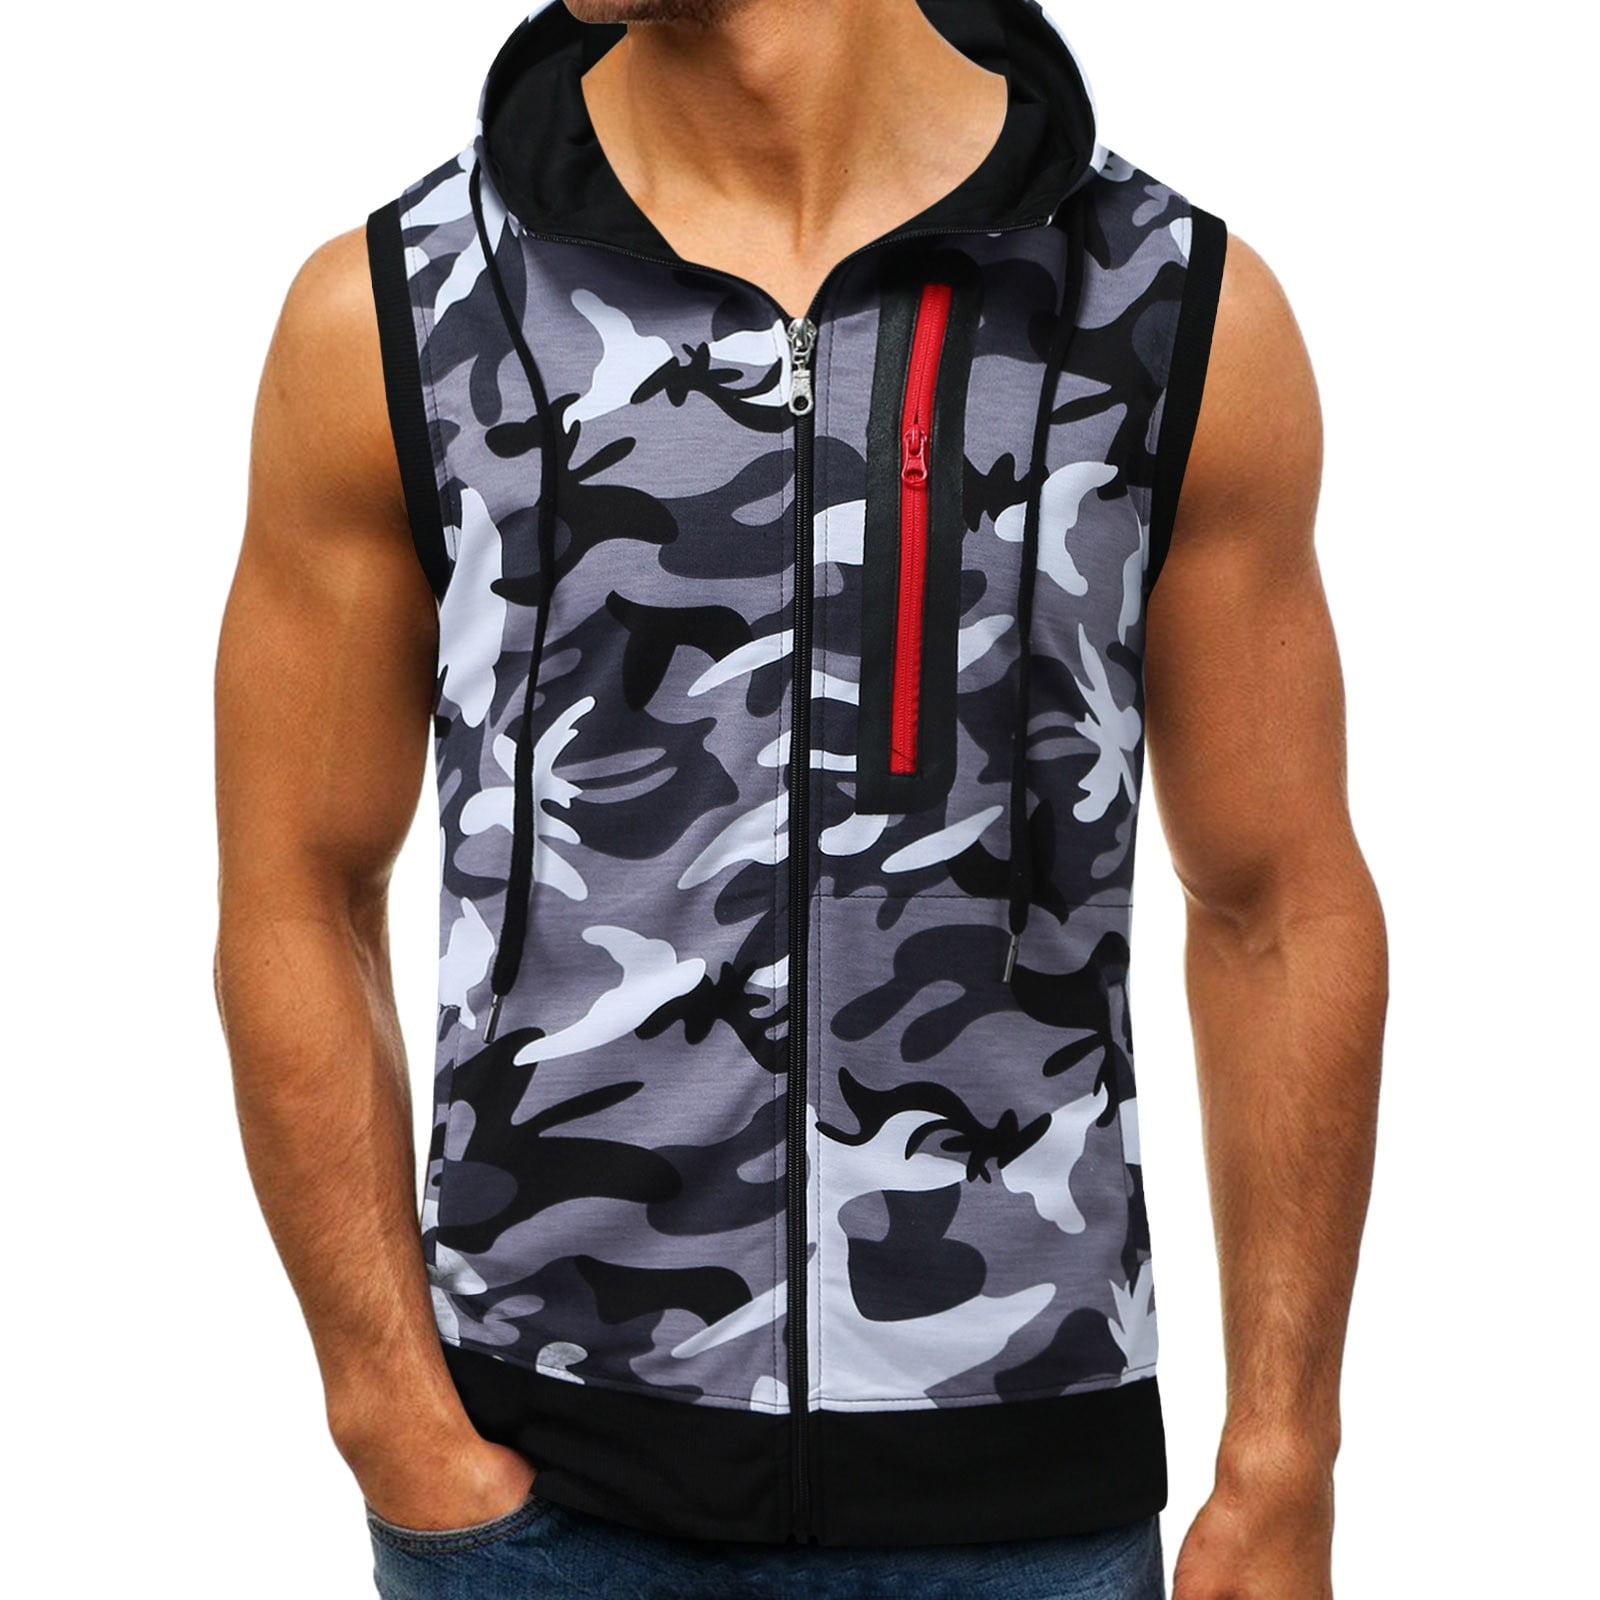 iHAZA Camouflage Hoodie Vest Mens Summer Casual Hooded Sleeveless Top Blouse 